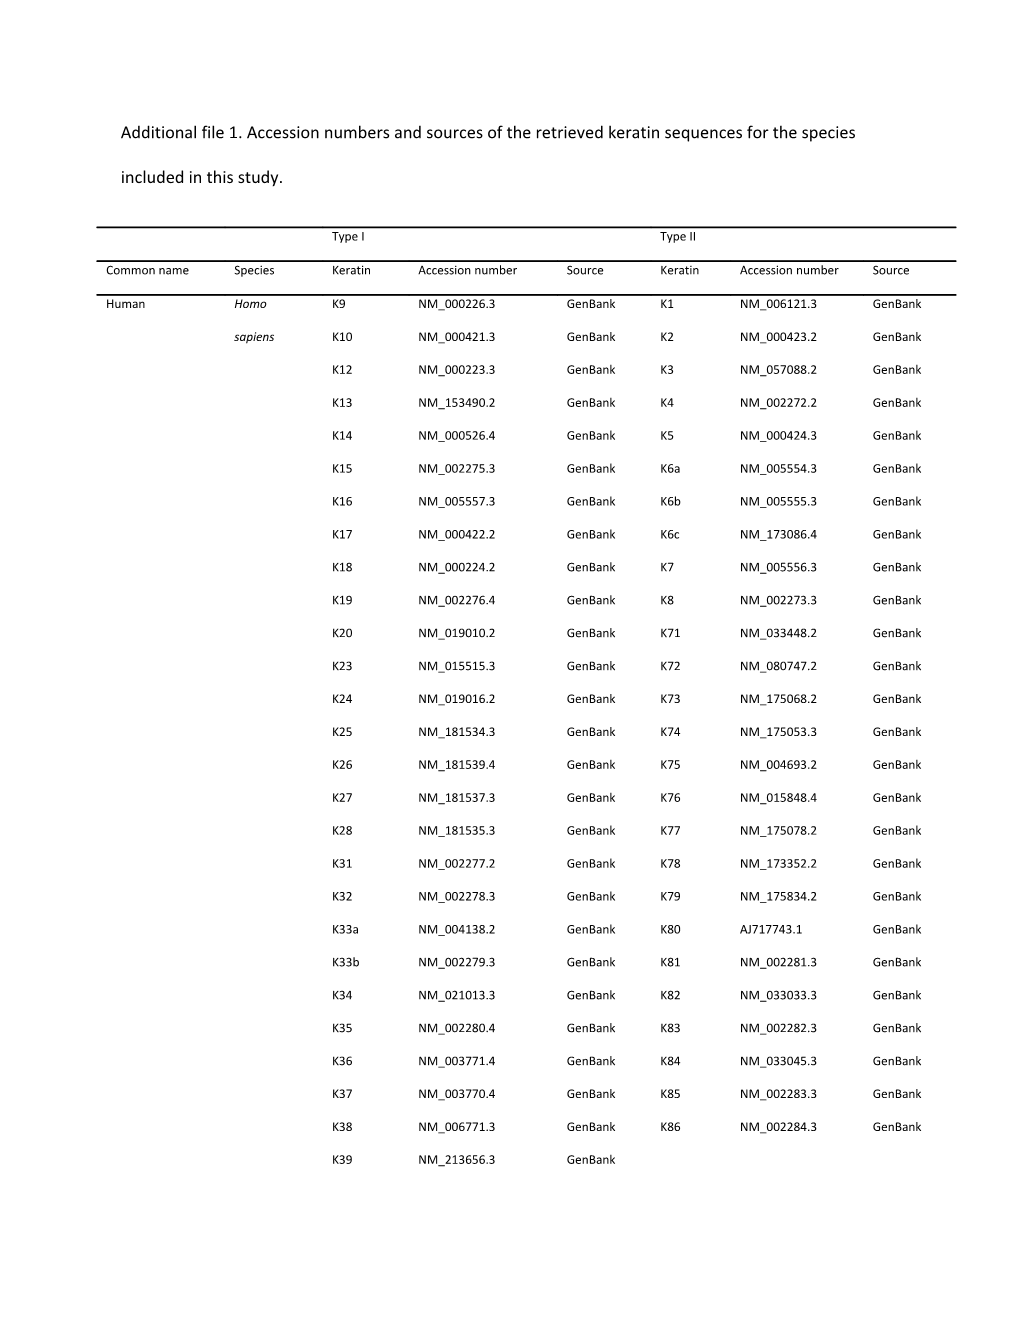 Additional File 1. Accession Numbers and Sources of the Retrieved Keratin Sequences For